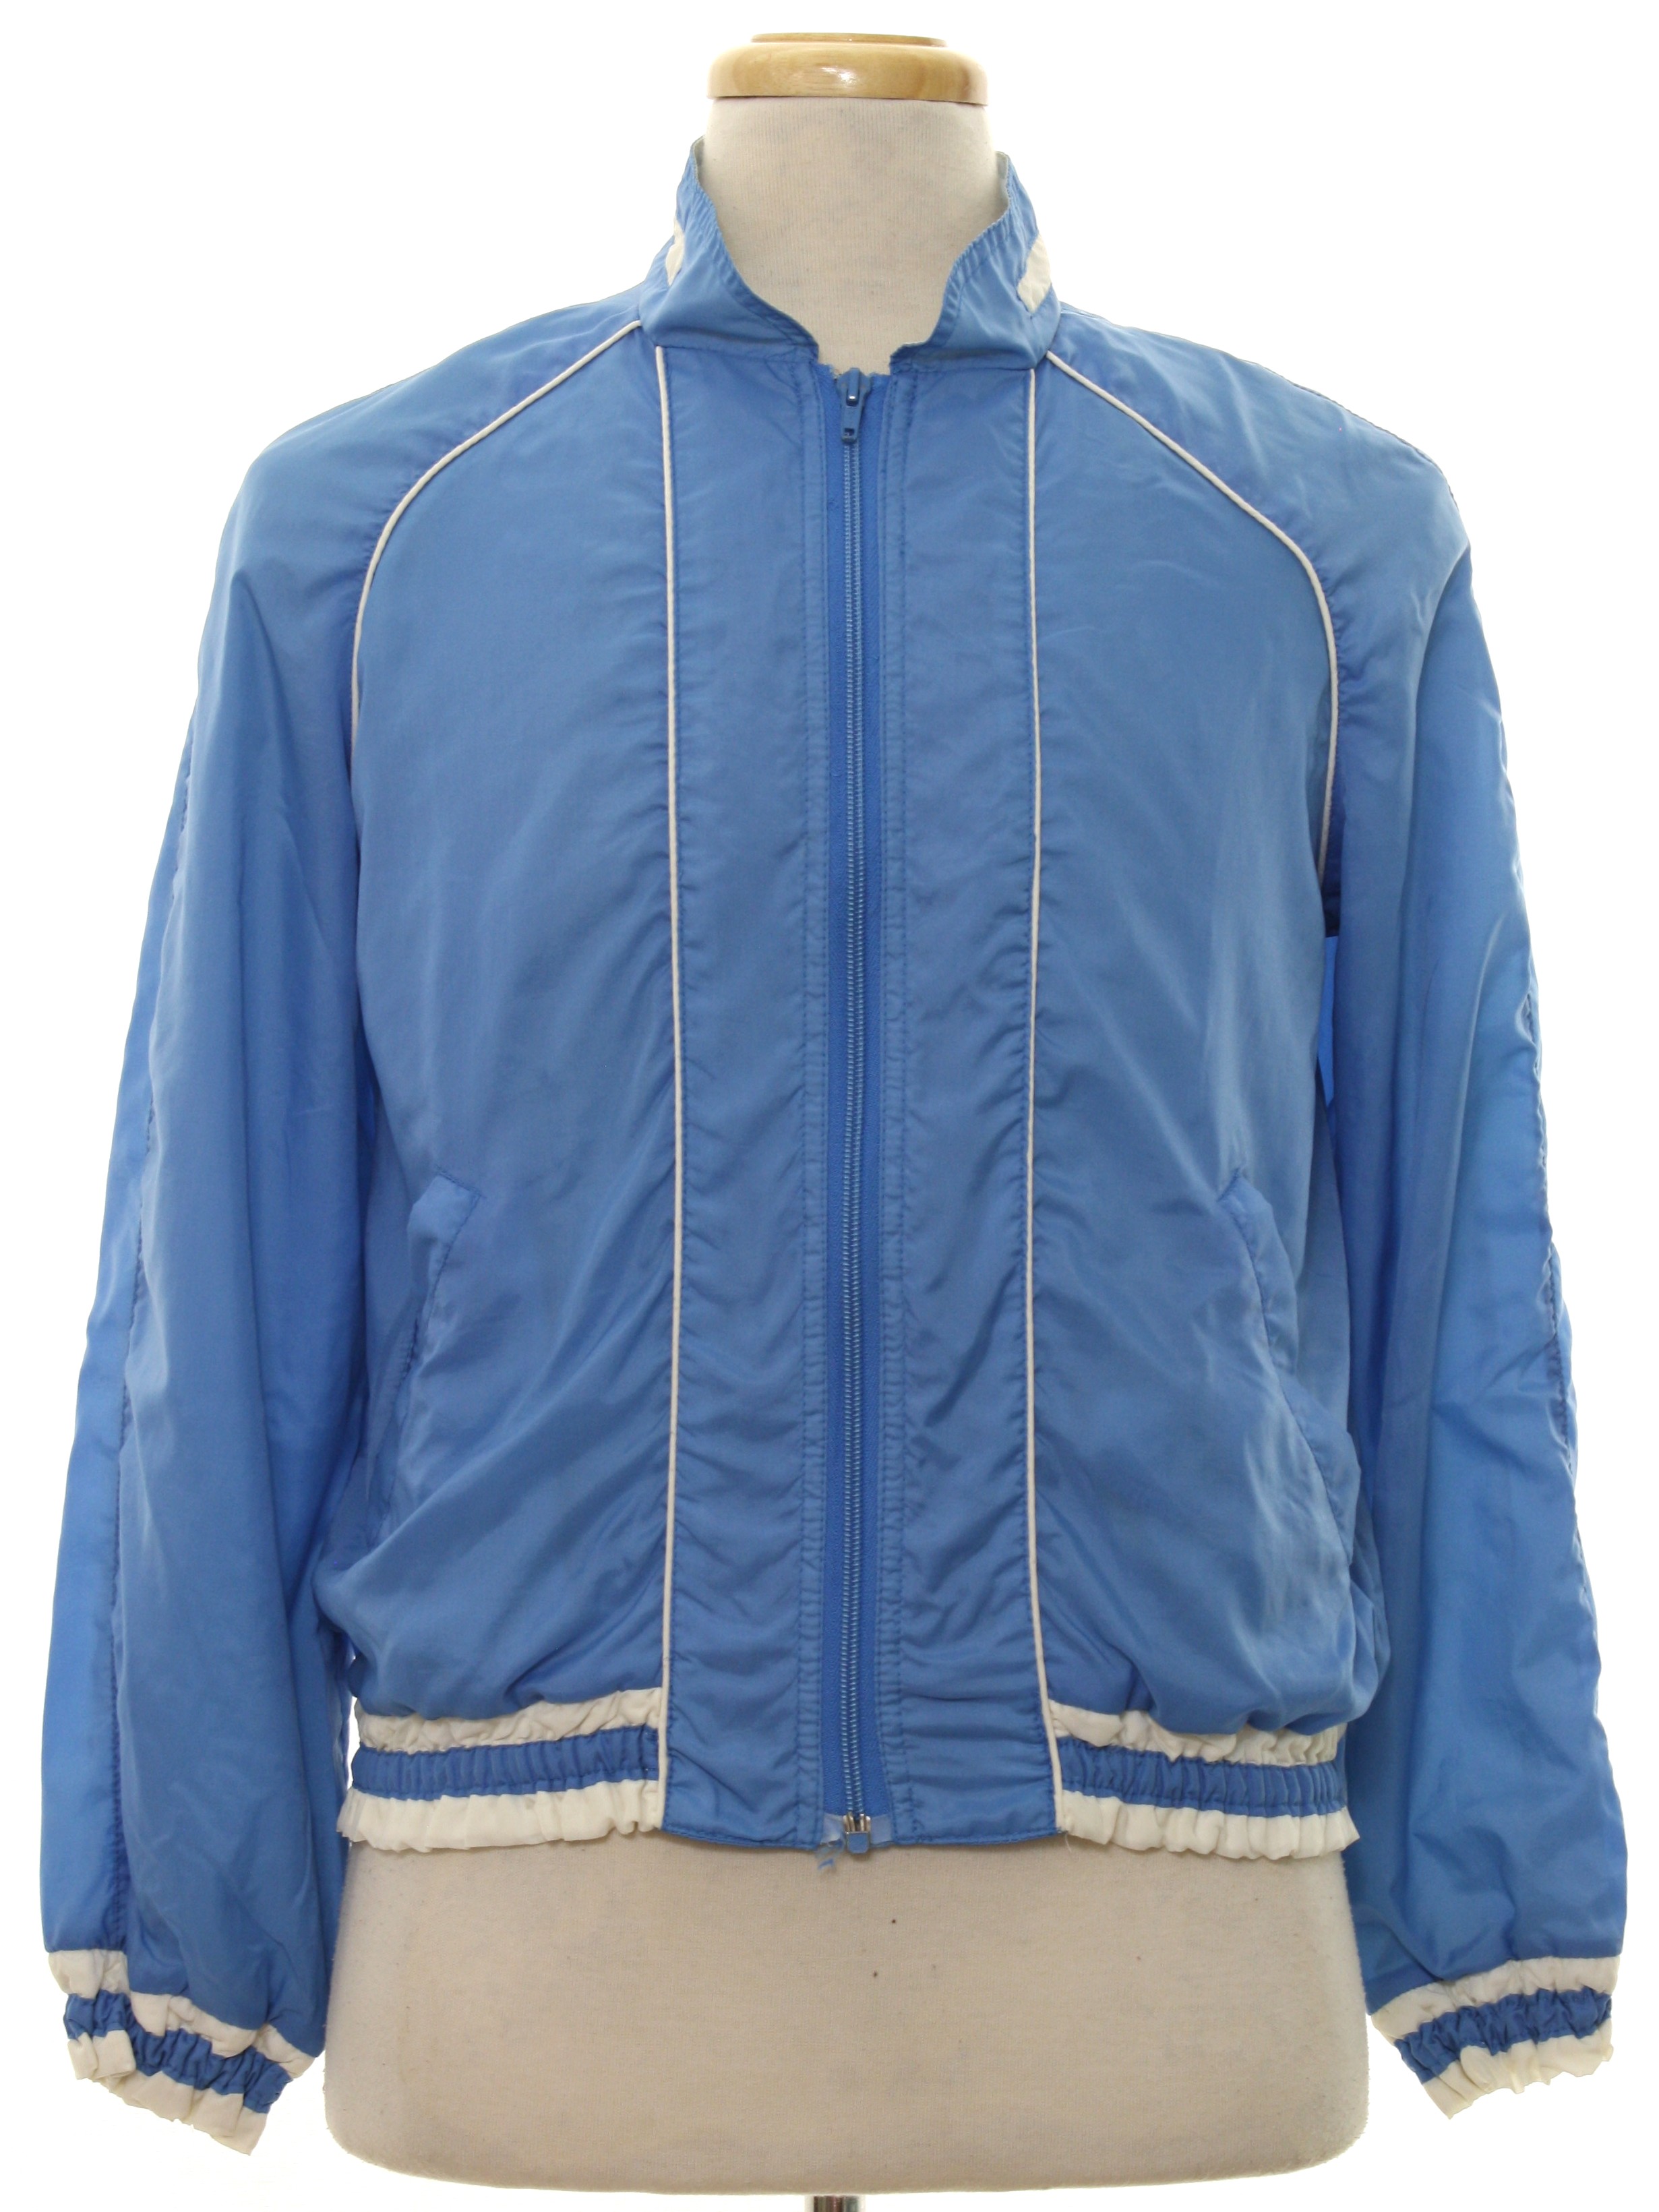 Download Retro 1980's Jacket (Care Label Only) : 80s -Care Label ...